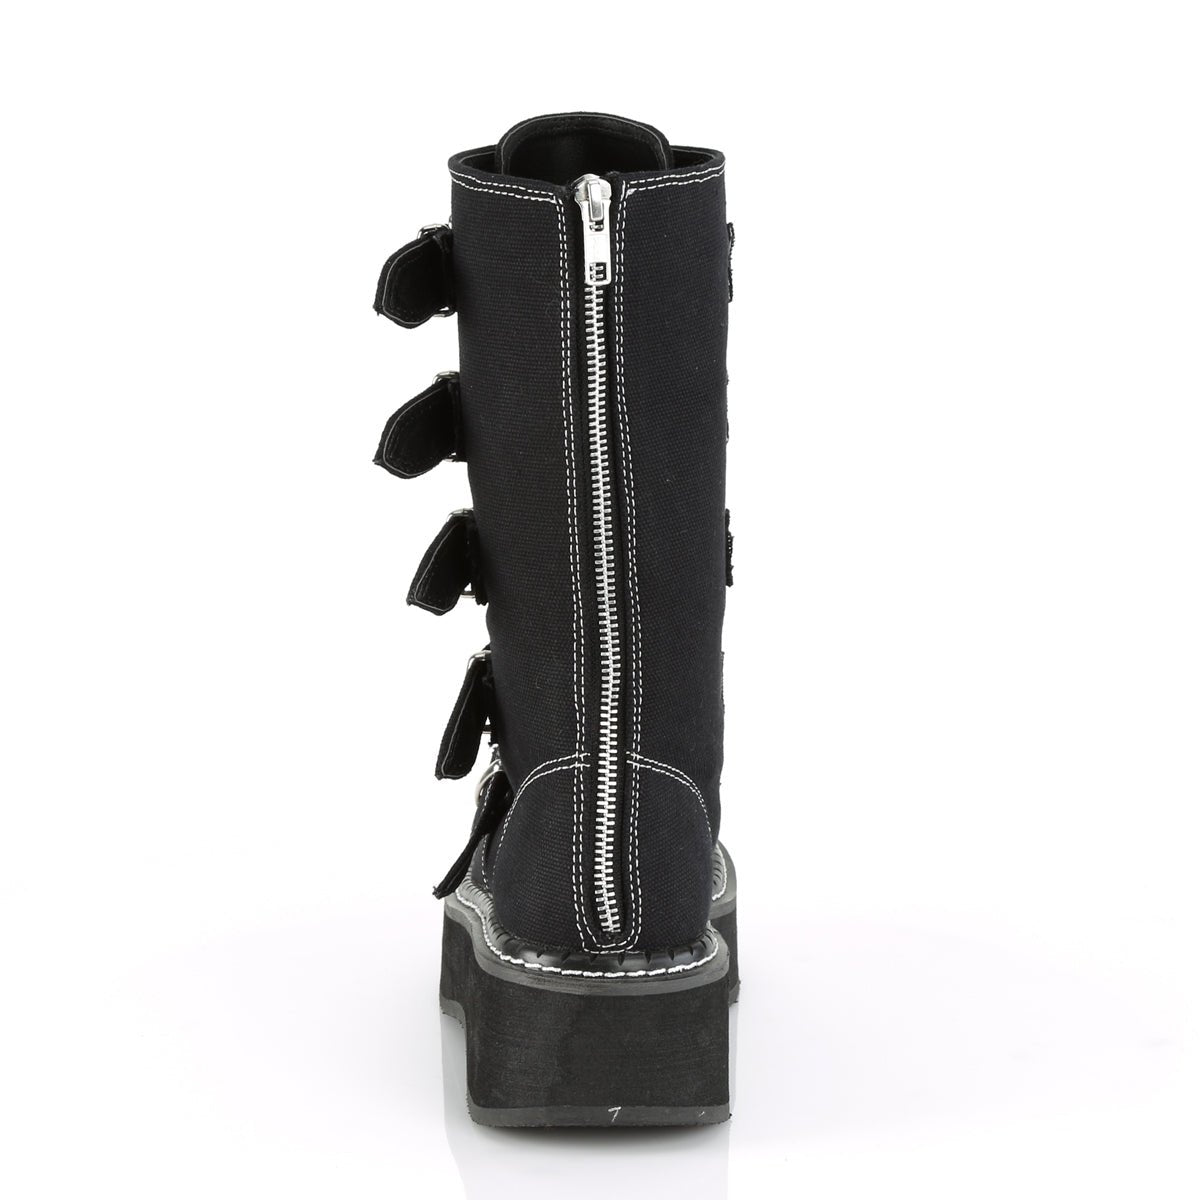 Too Fast | Demonia Emily 341 | Black Canvas Women's Mid Calf Boots